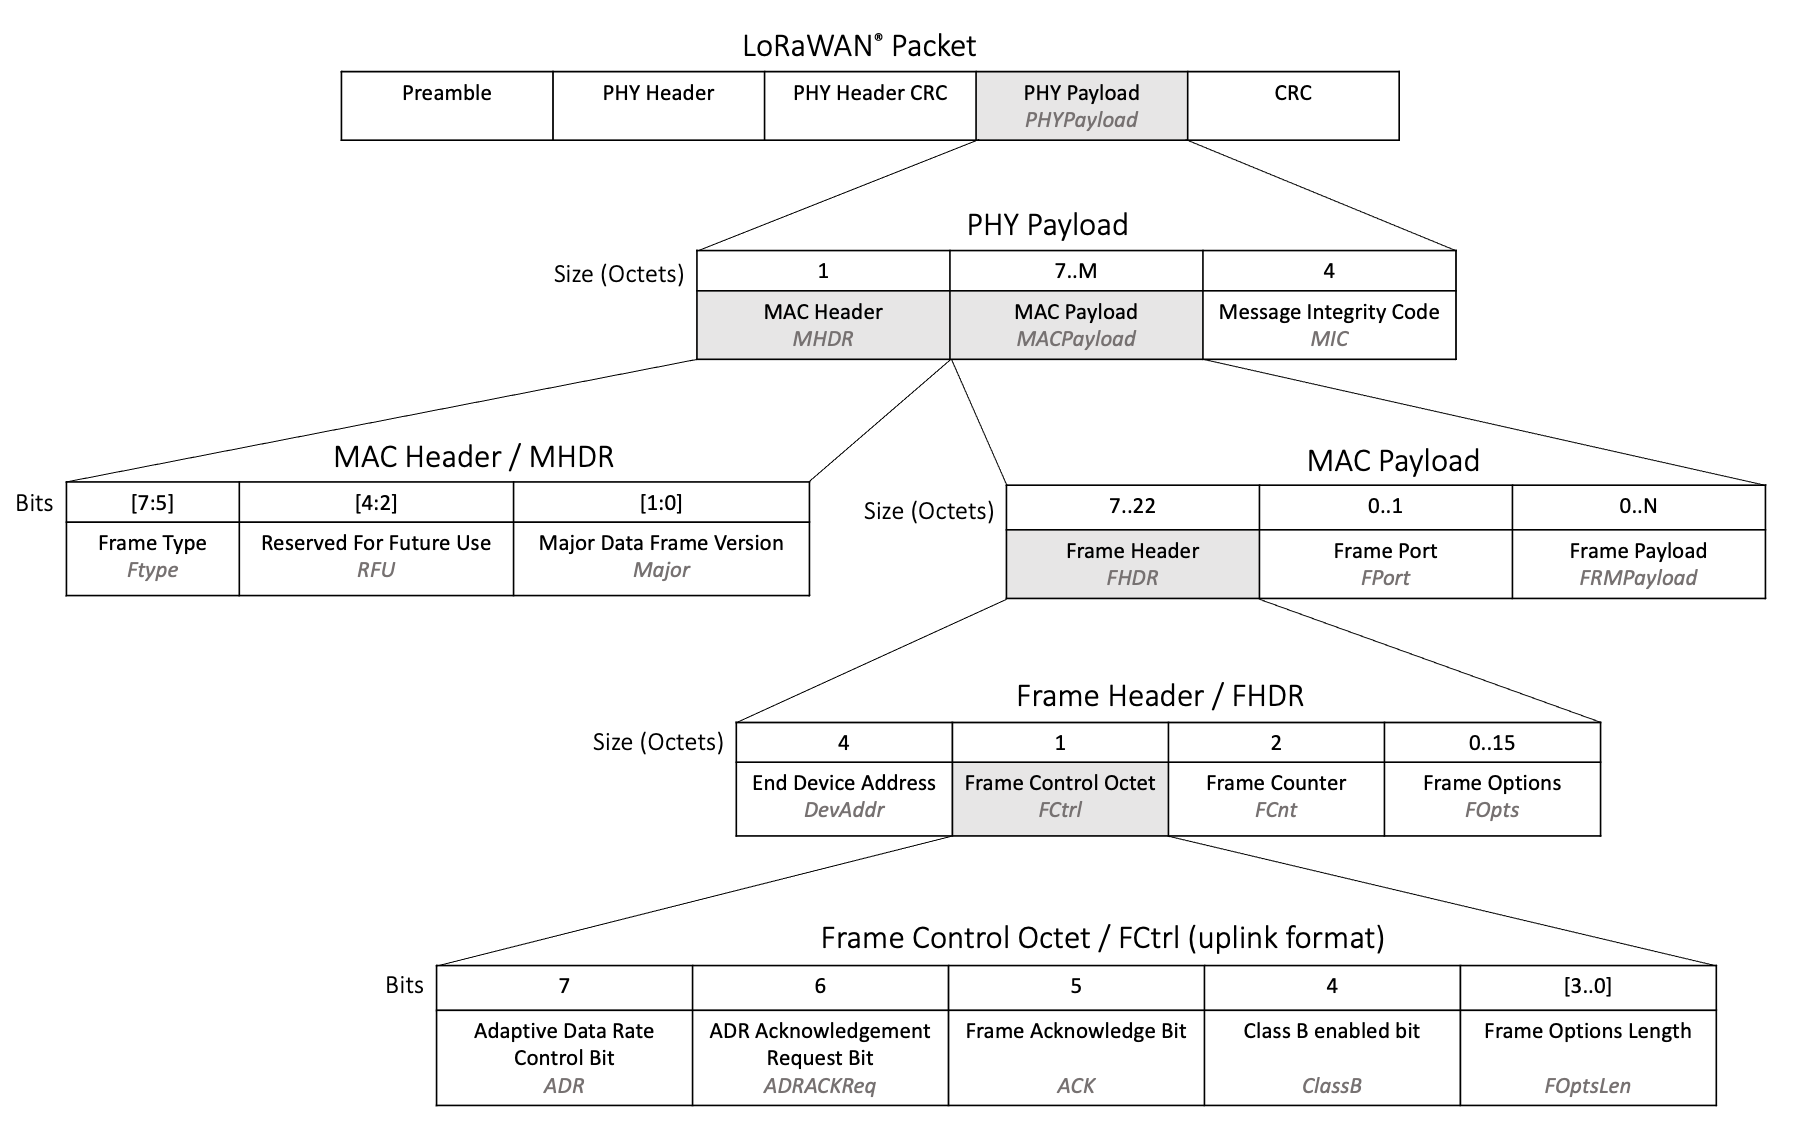 Fields contained in a LoRaWAN uplink packet